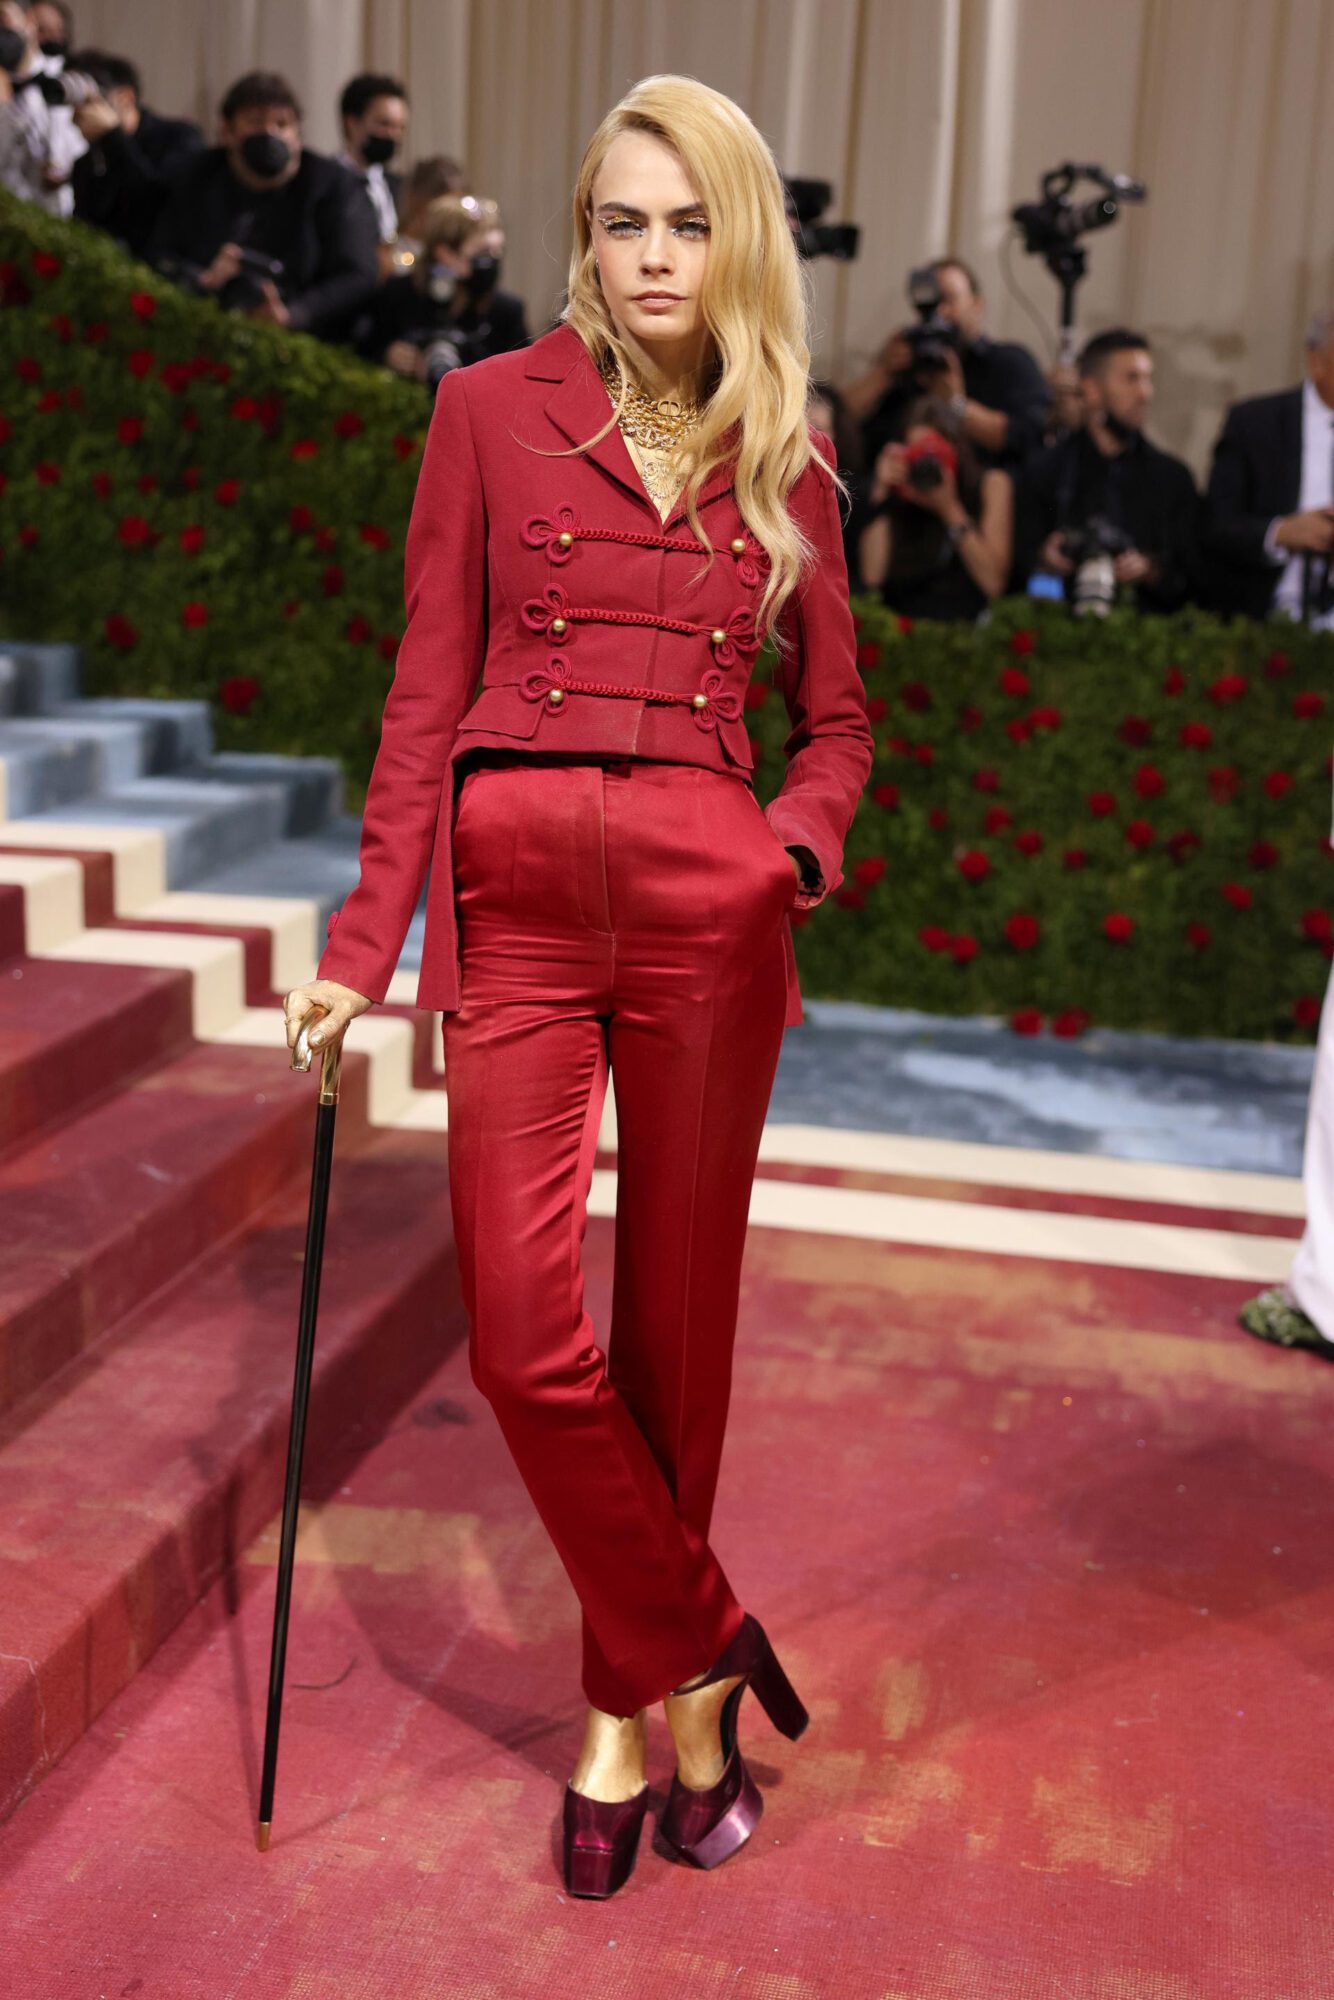 Cara Delevingne wore a Dior Haute Couture Spring-Summer 2019 burgundy ottoman jacket with frogging and satin trousers. She also wore Dior jewelry.